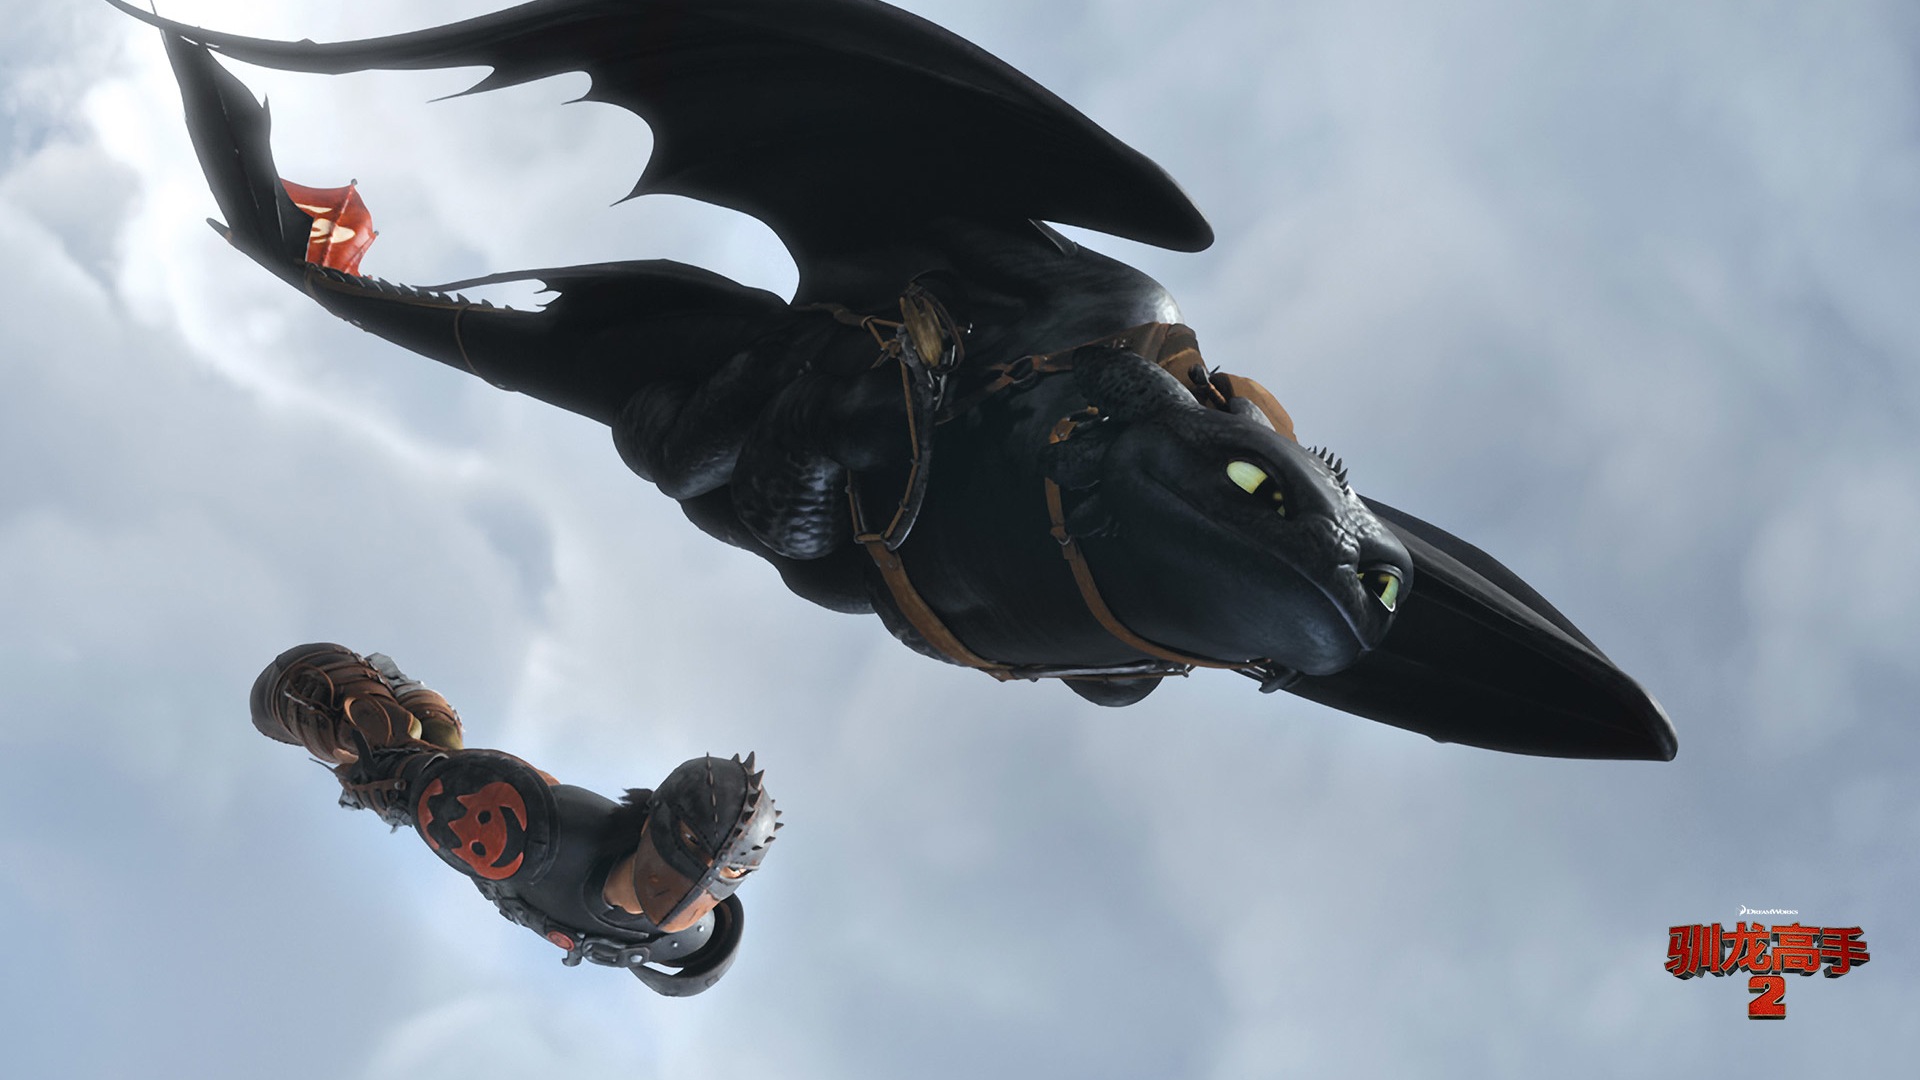 How to Train Your Dragon 2 HD wallpapers #6 - 1920x1080